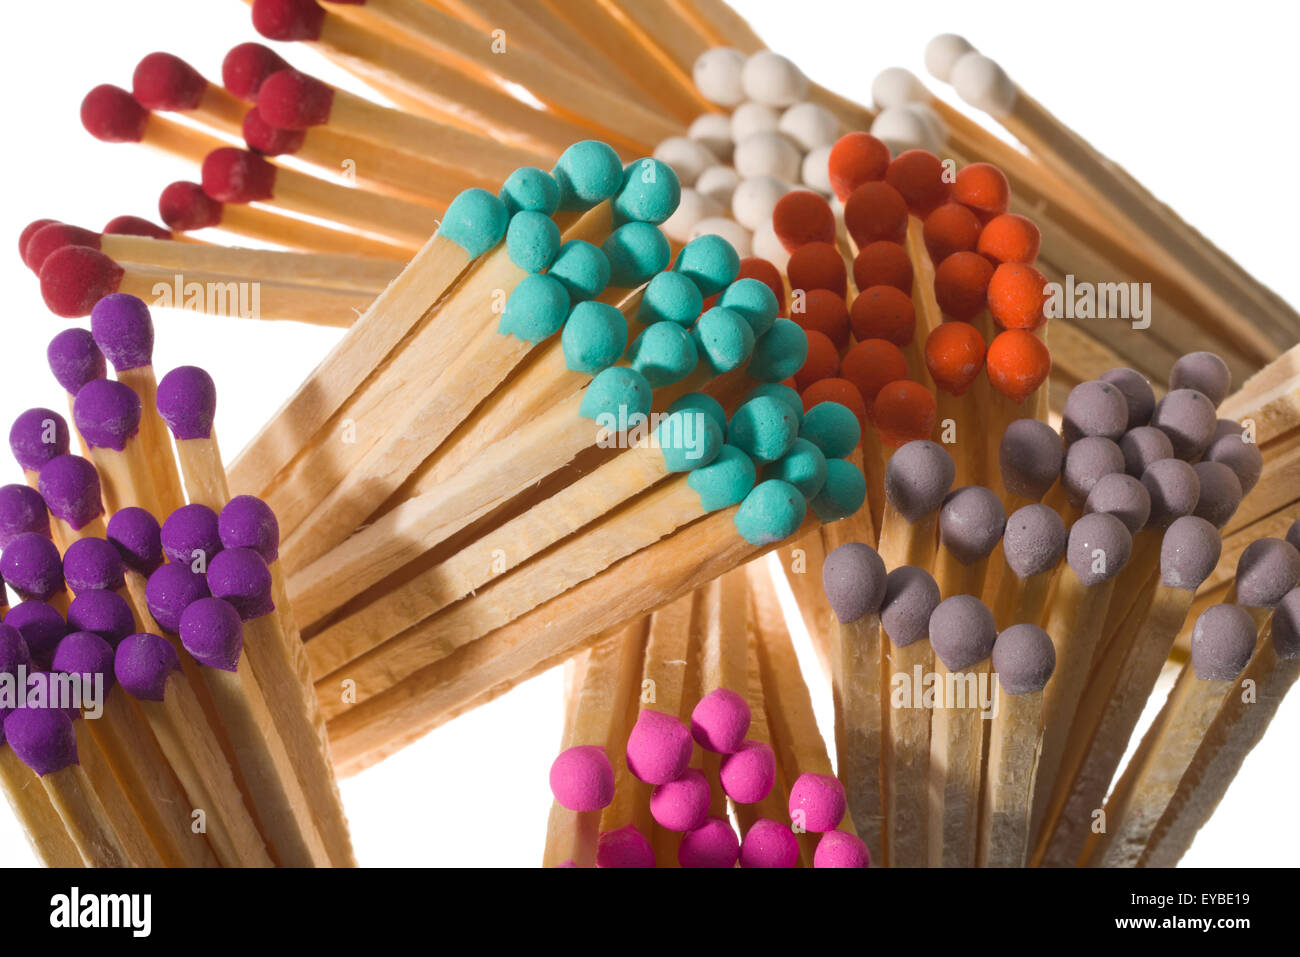 Multicoloured safety match heads. Long matches for lighting a fire. Stock Photo